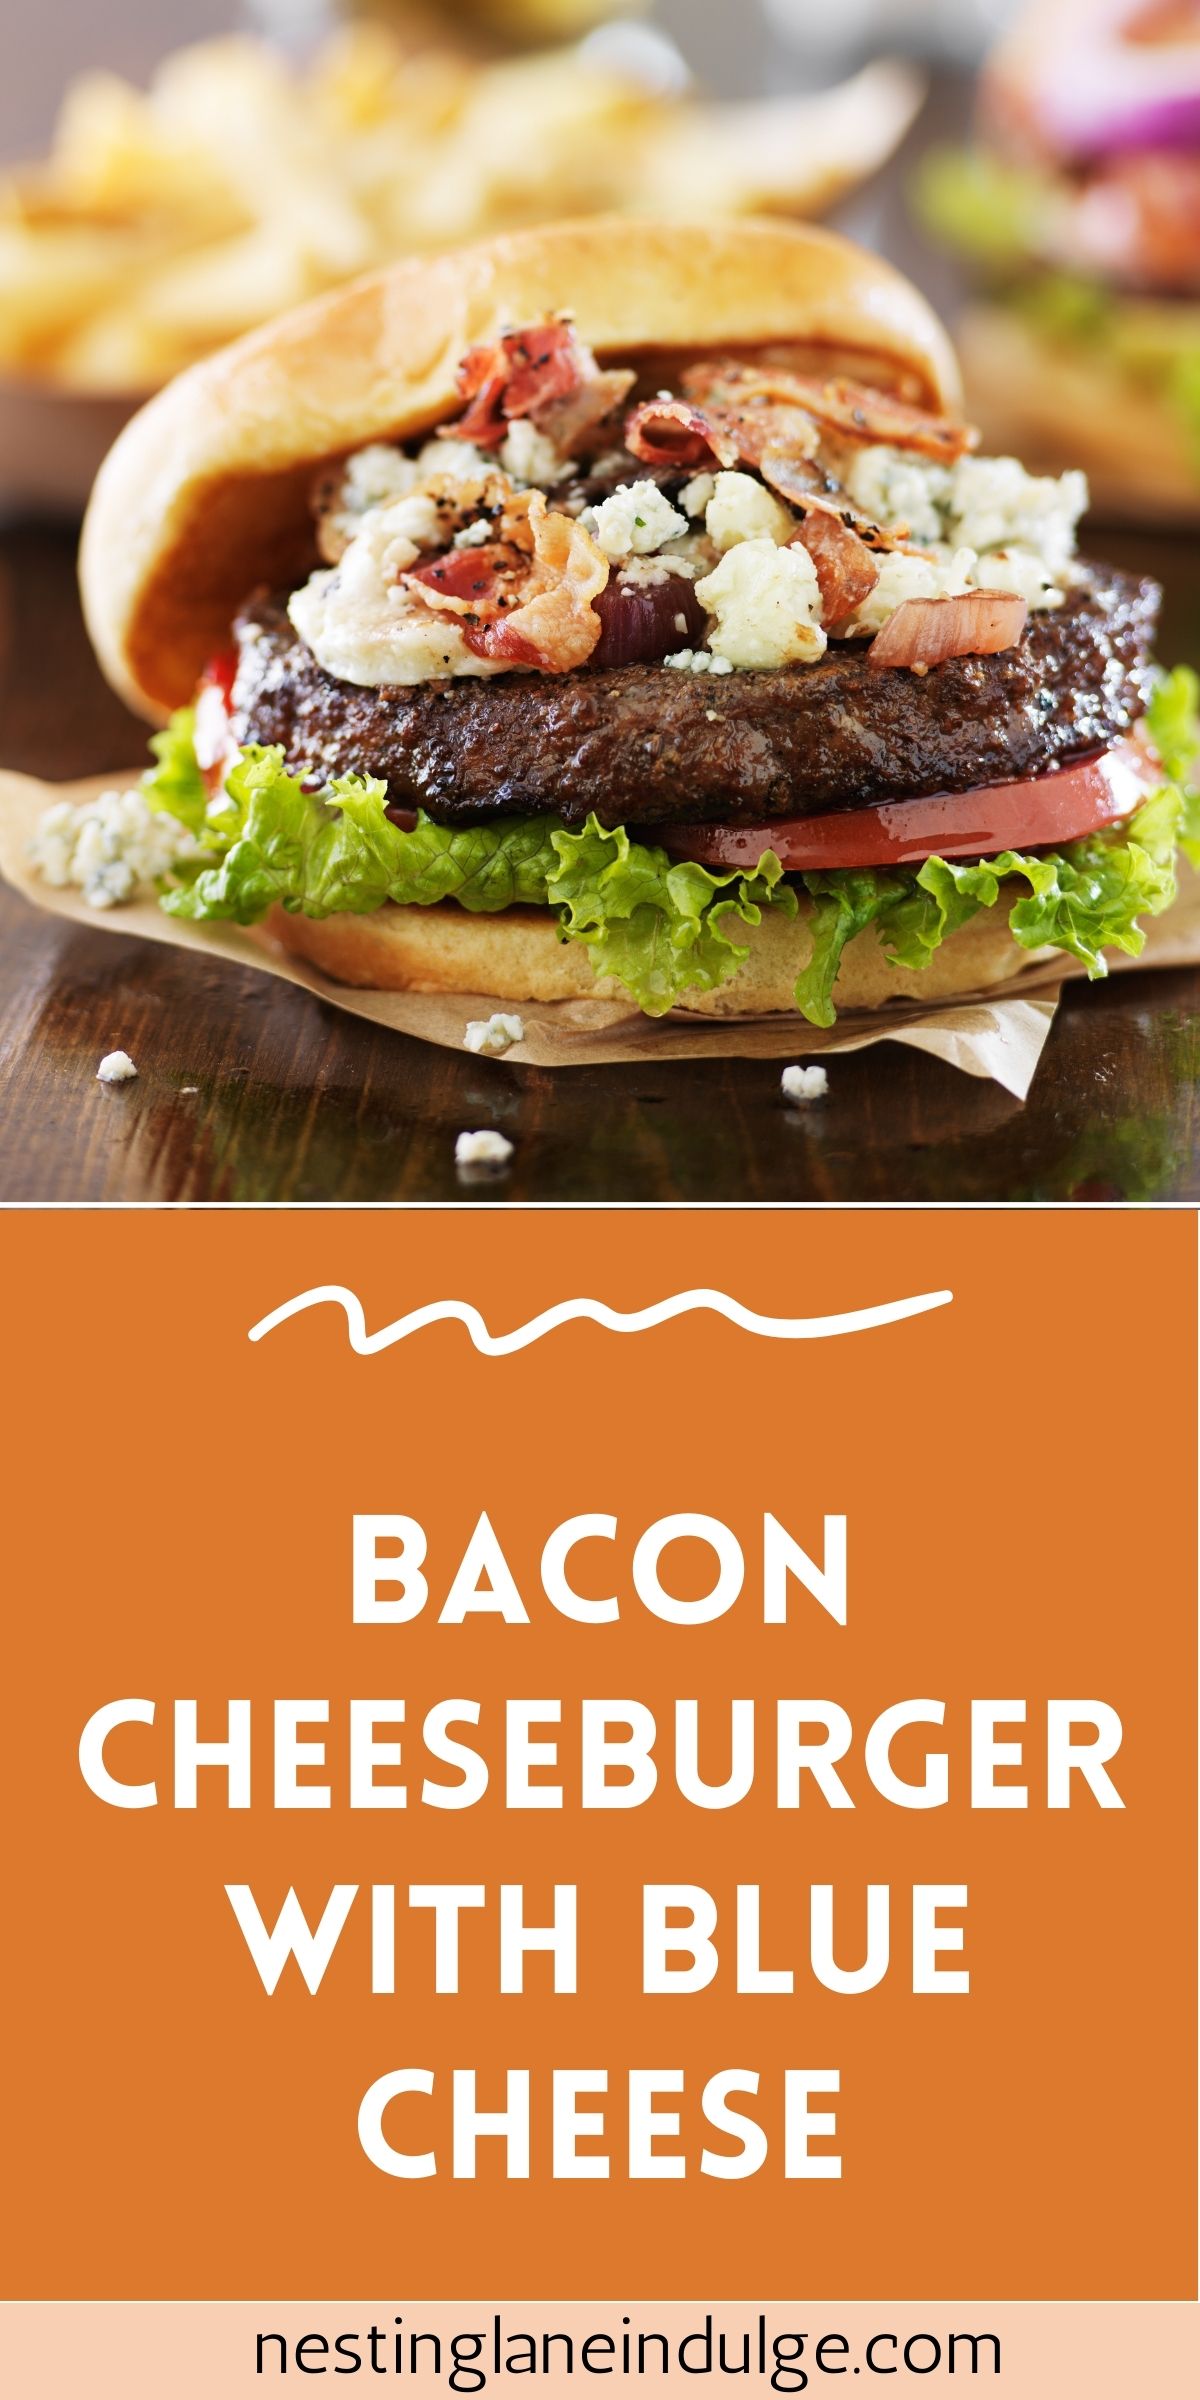 Graphic for Pinterest of Bacon Cheeseburgers with Blue Cheese Recipe.